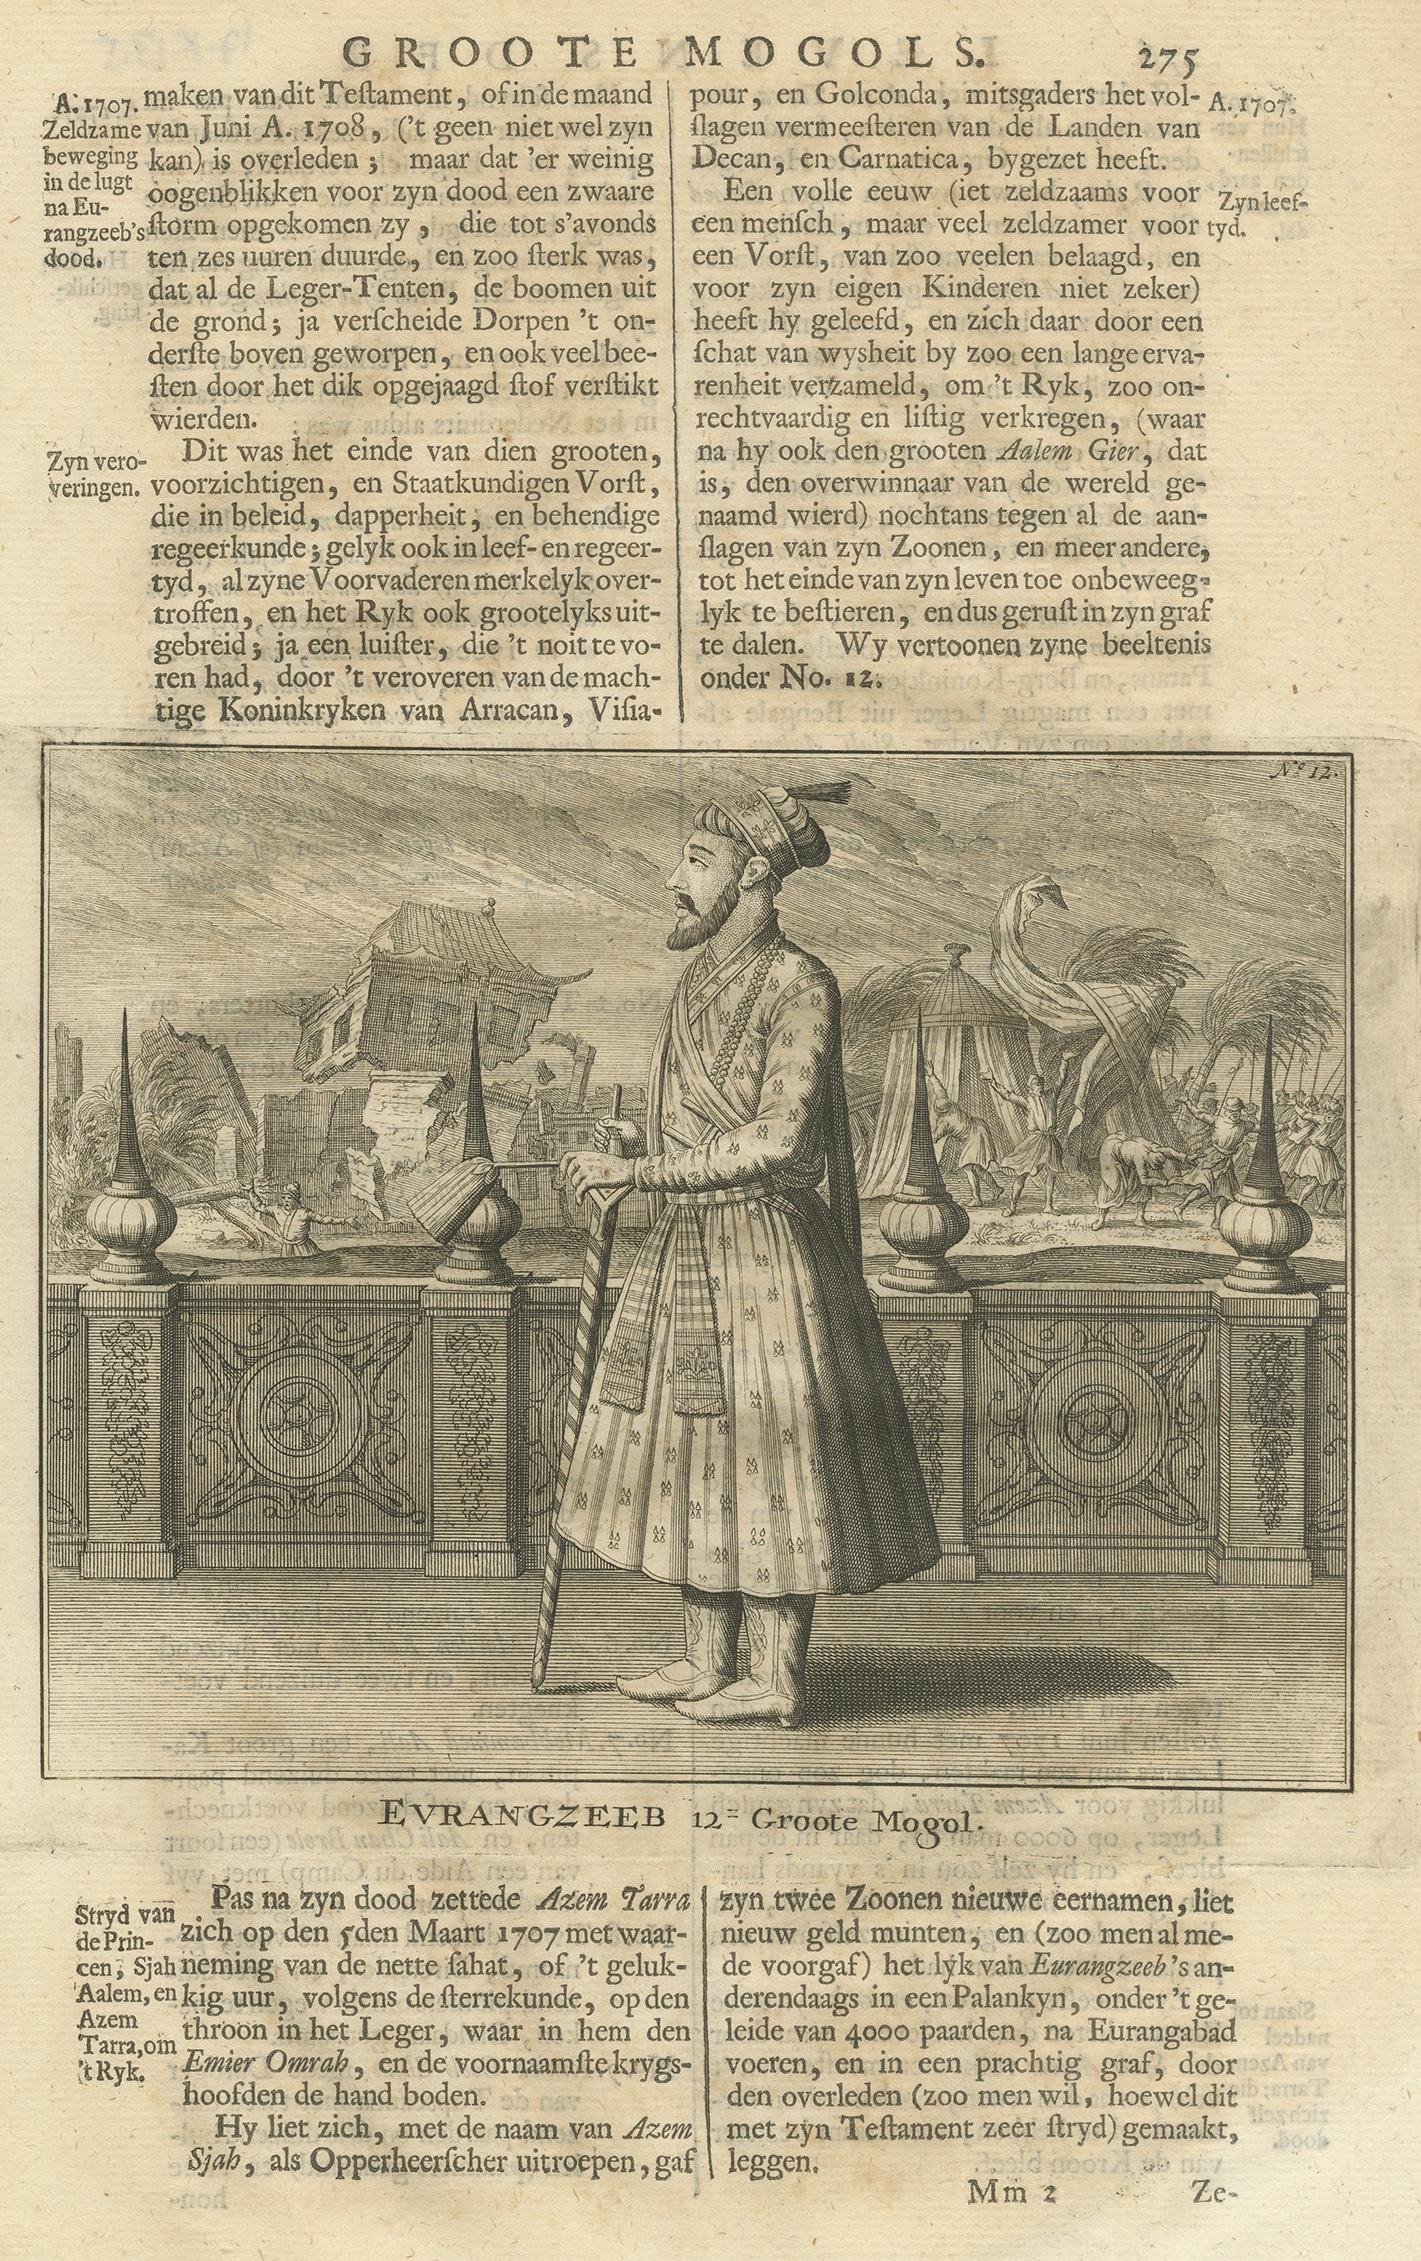 Antique print titled 'Evrangzeeb, 12de Groote Mogol'. This print depicts Farrukhsiyar, the 12th Mughal Emperor. Text on verso. This print originates from 'Oud en Nieuw Oost-Indiën' by F. Valentijn.